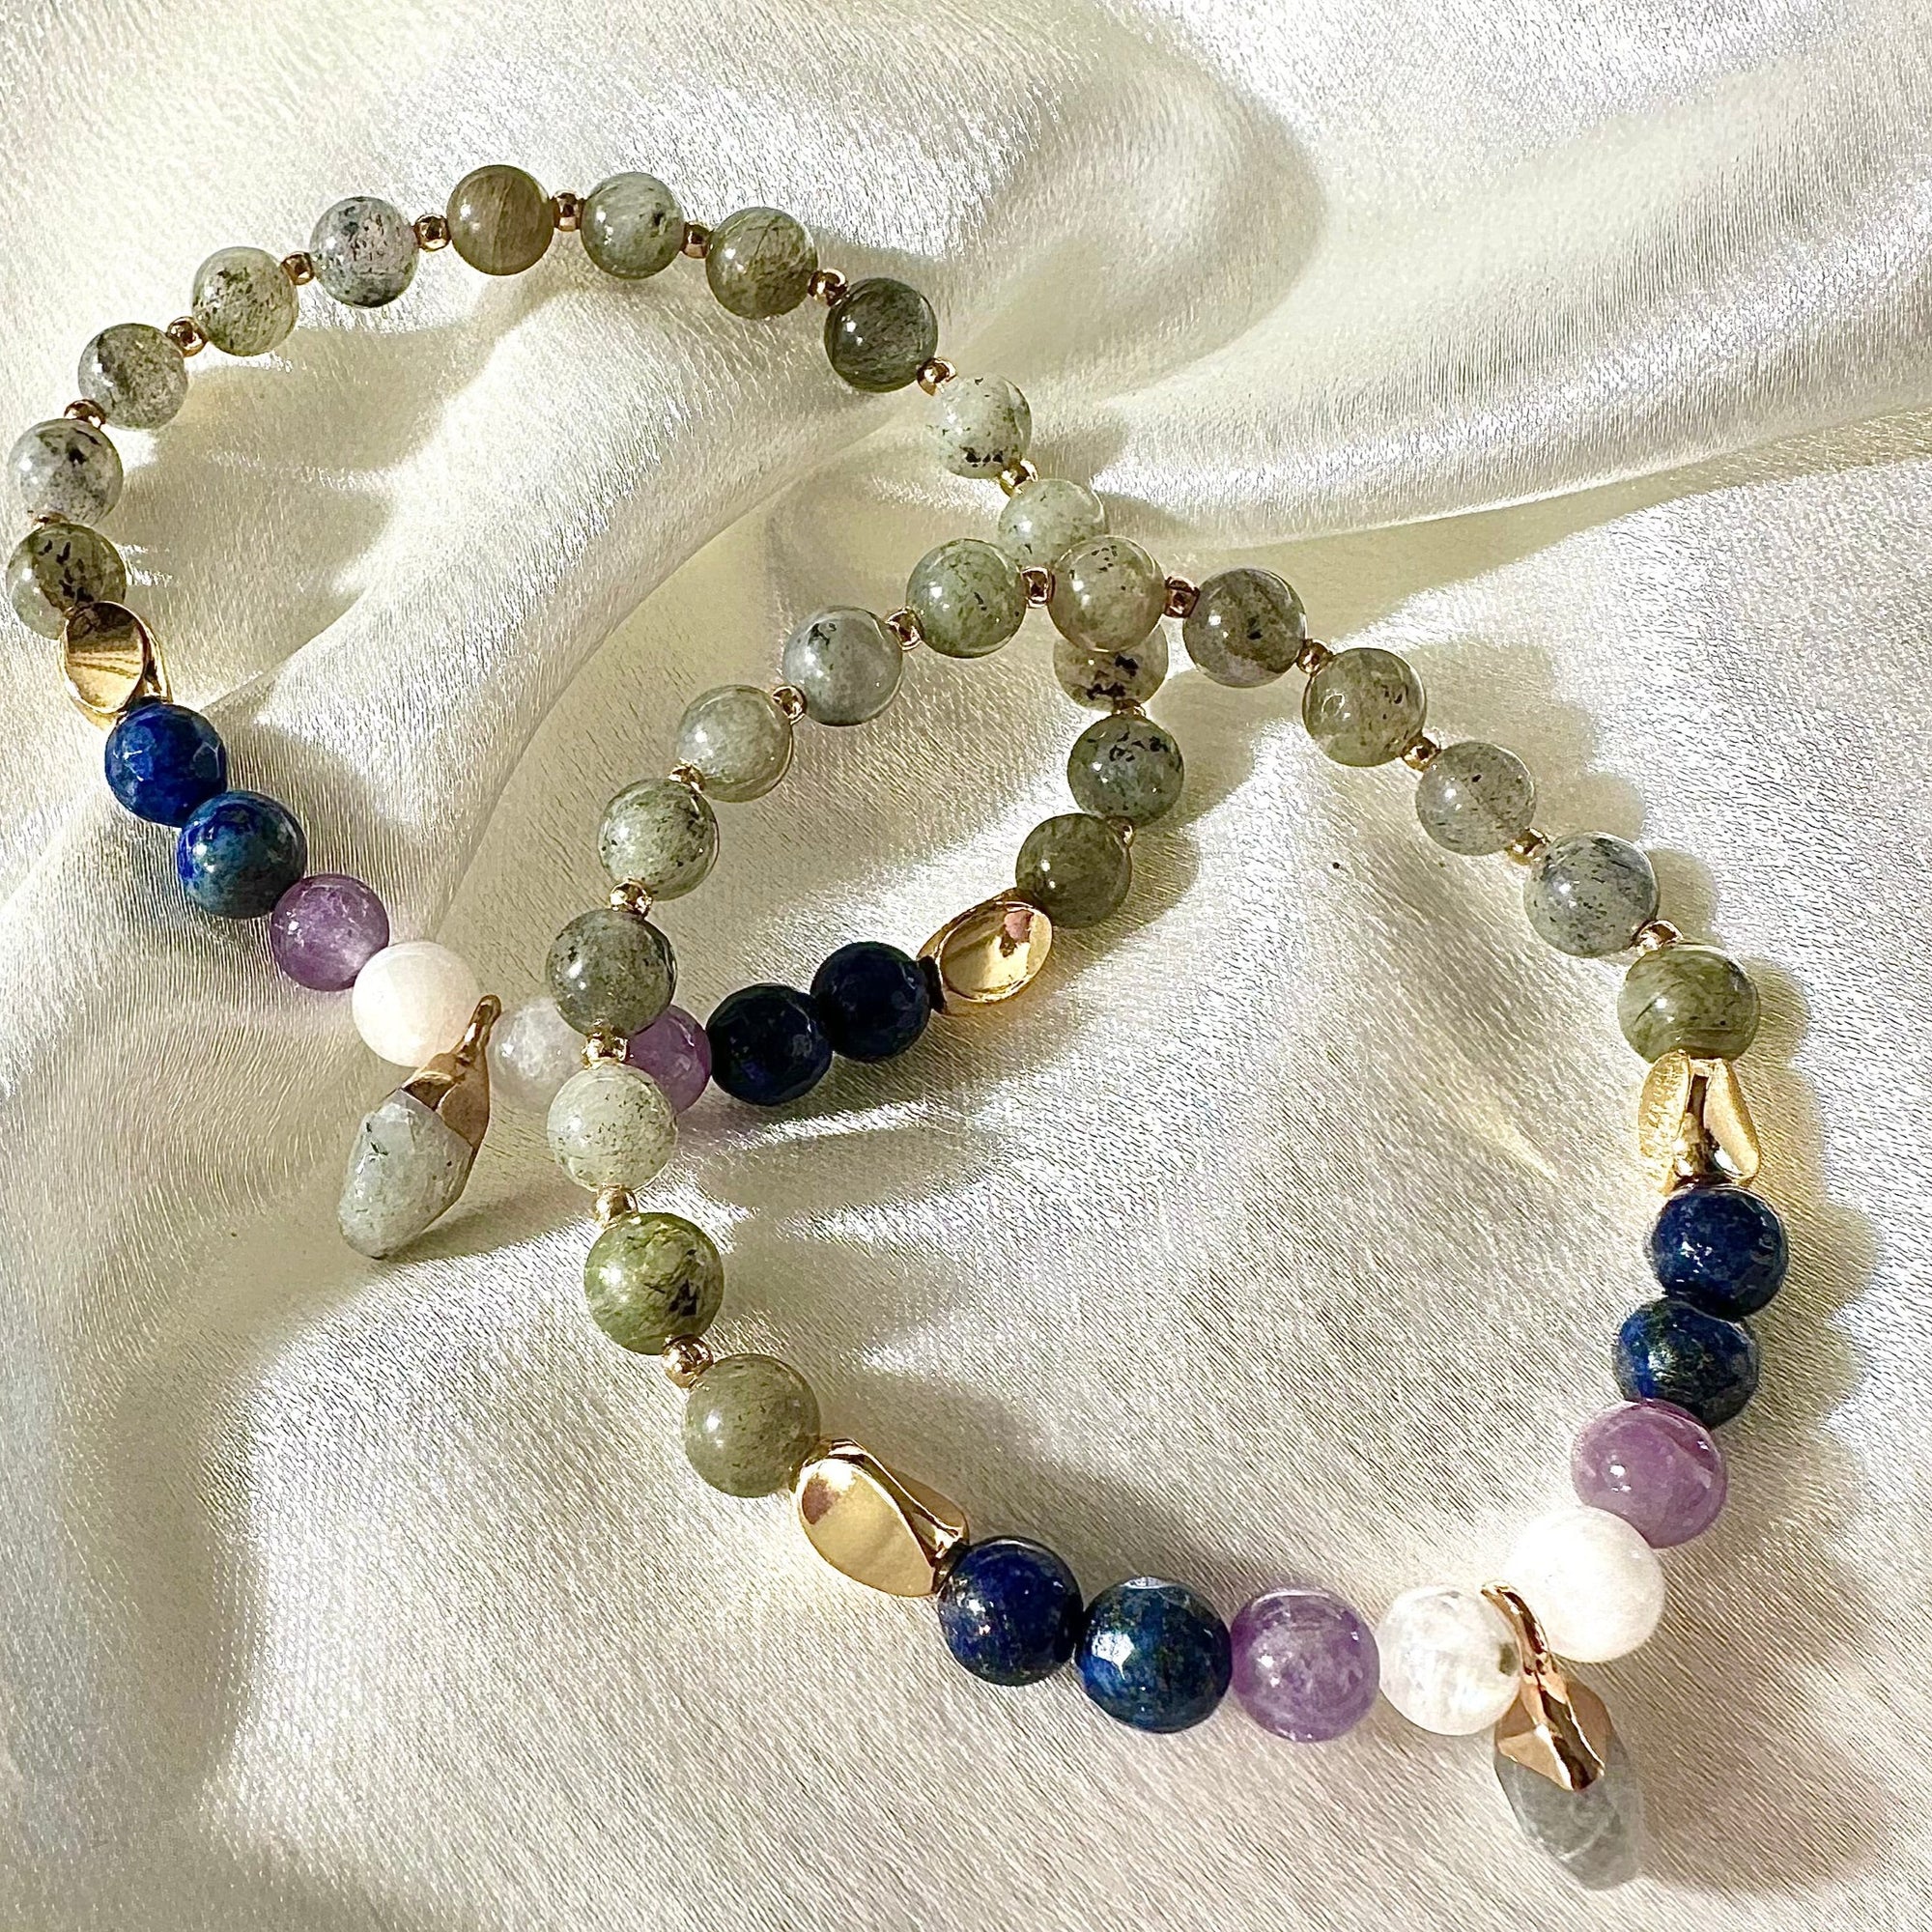 This bracelet is designed to help give relief to those experiencing menopause.  Amethyst helps calm the mind and body, reducing stress, whilst helping combat insomnia along with Moonstone and Labradorite.  Moonstone helps balances the hormonal and menstrual cycle.  Lapis Lazuli helps harmonise the emotional levels.  Labradorite helps fight fatigue, calms mood swings and helps eliminate the stress on the body.